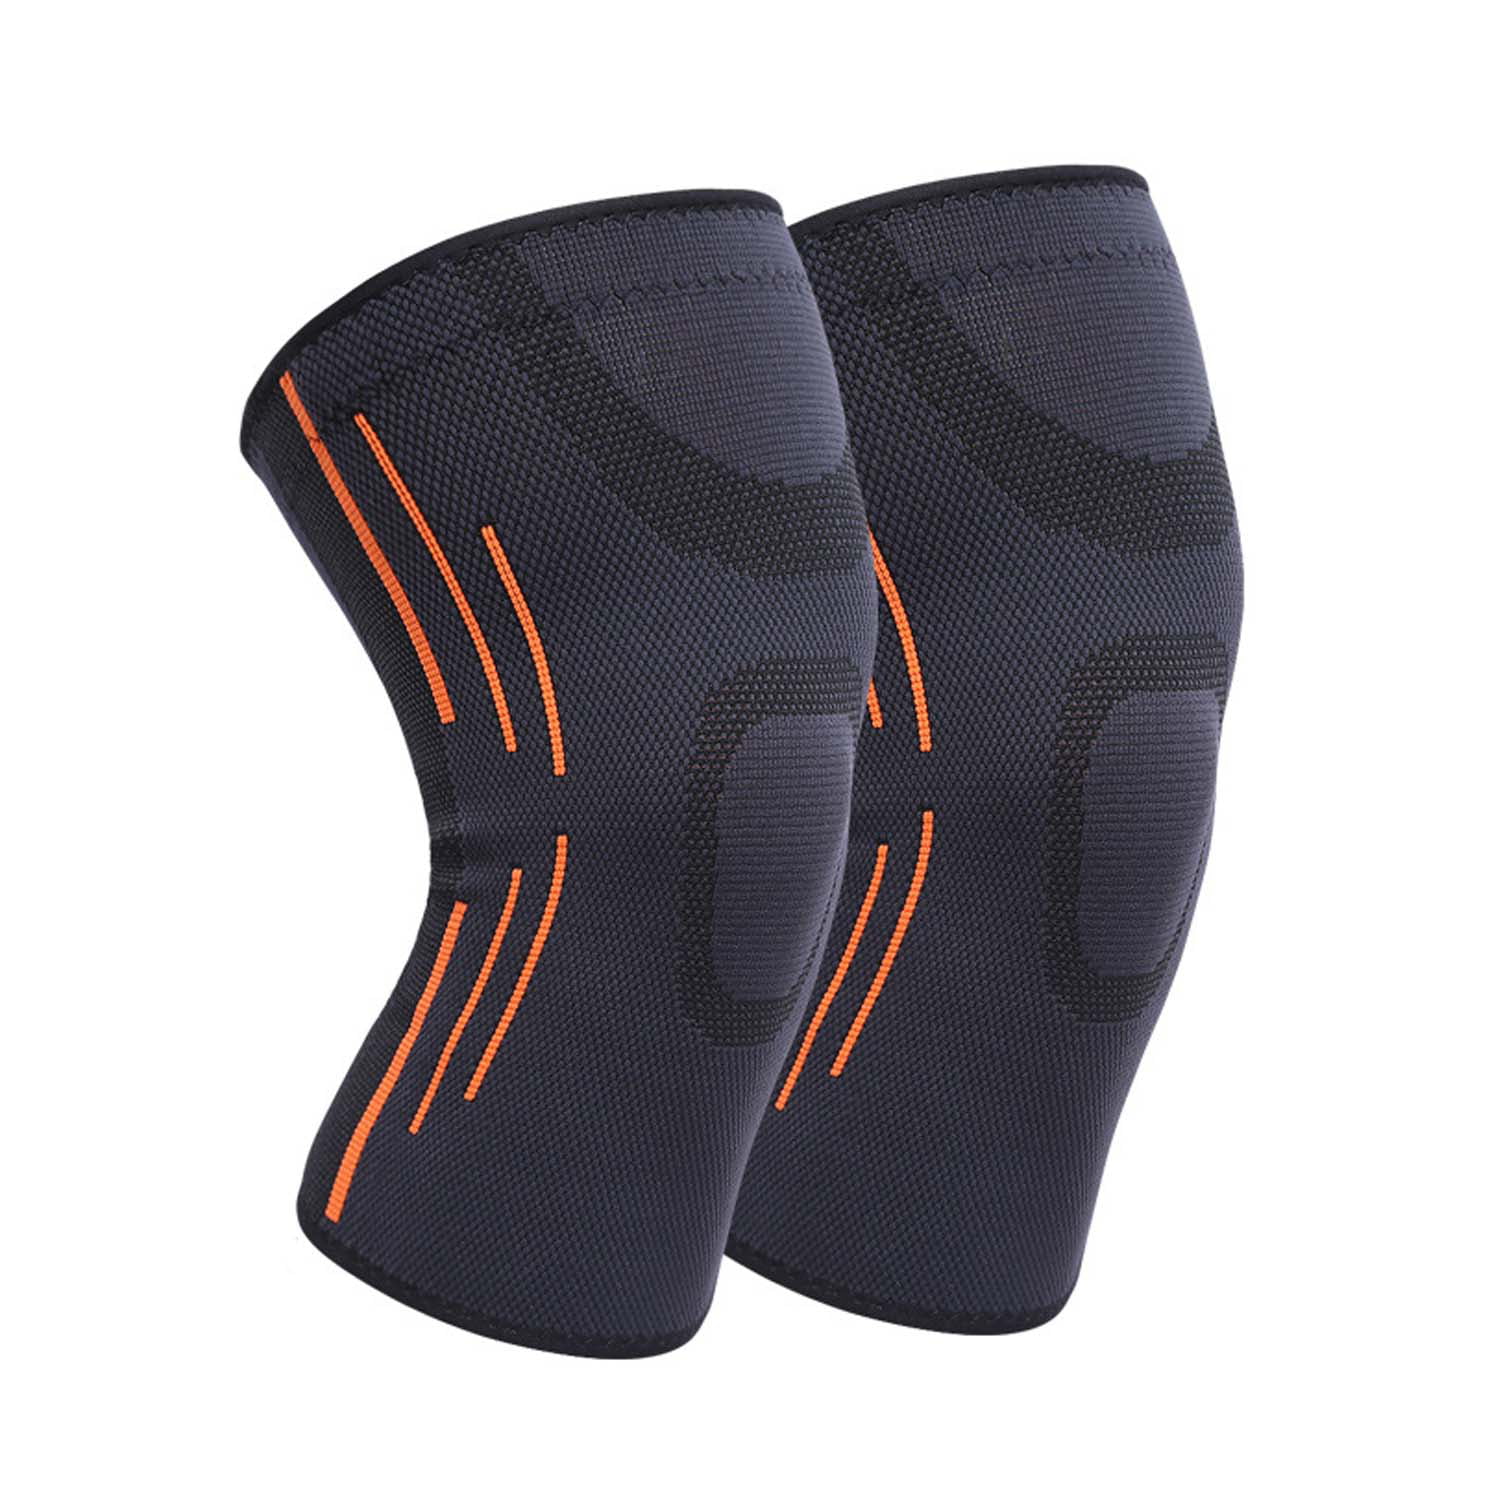 2PCS Knee Sleeve Compression Brace Support For Sport Joint Pain Arthritis Relief 